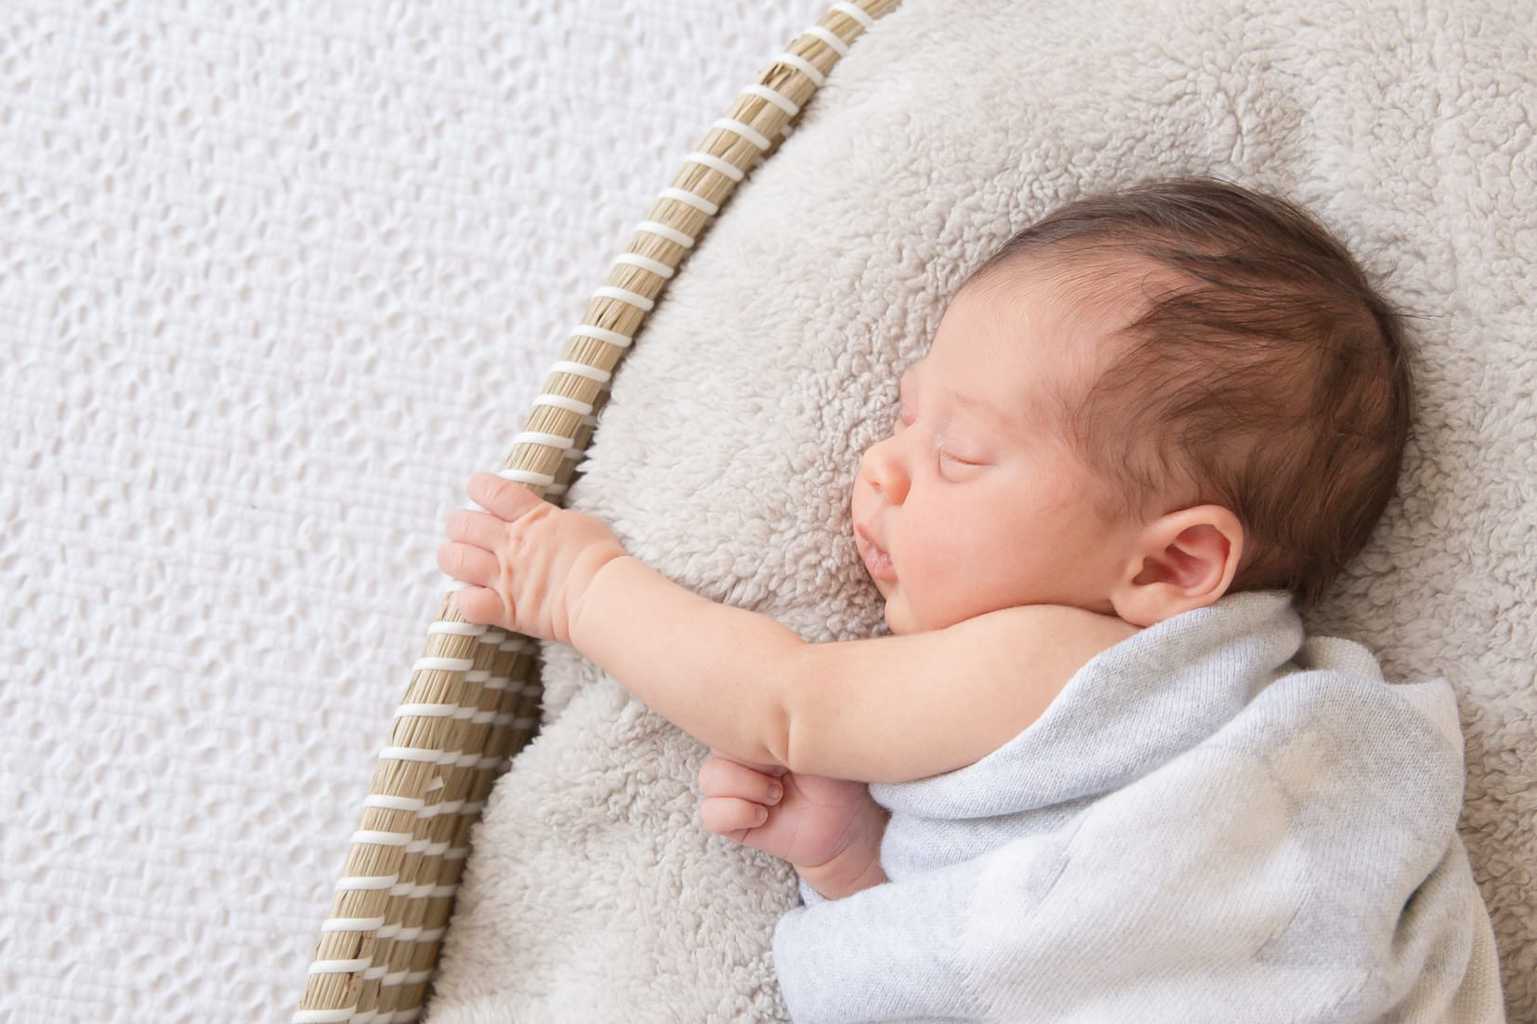 Photo of small baby sleeping in a towel on a cushion.Photo by Bright Photography.